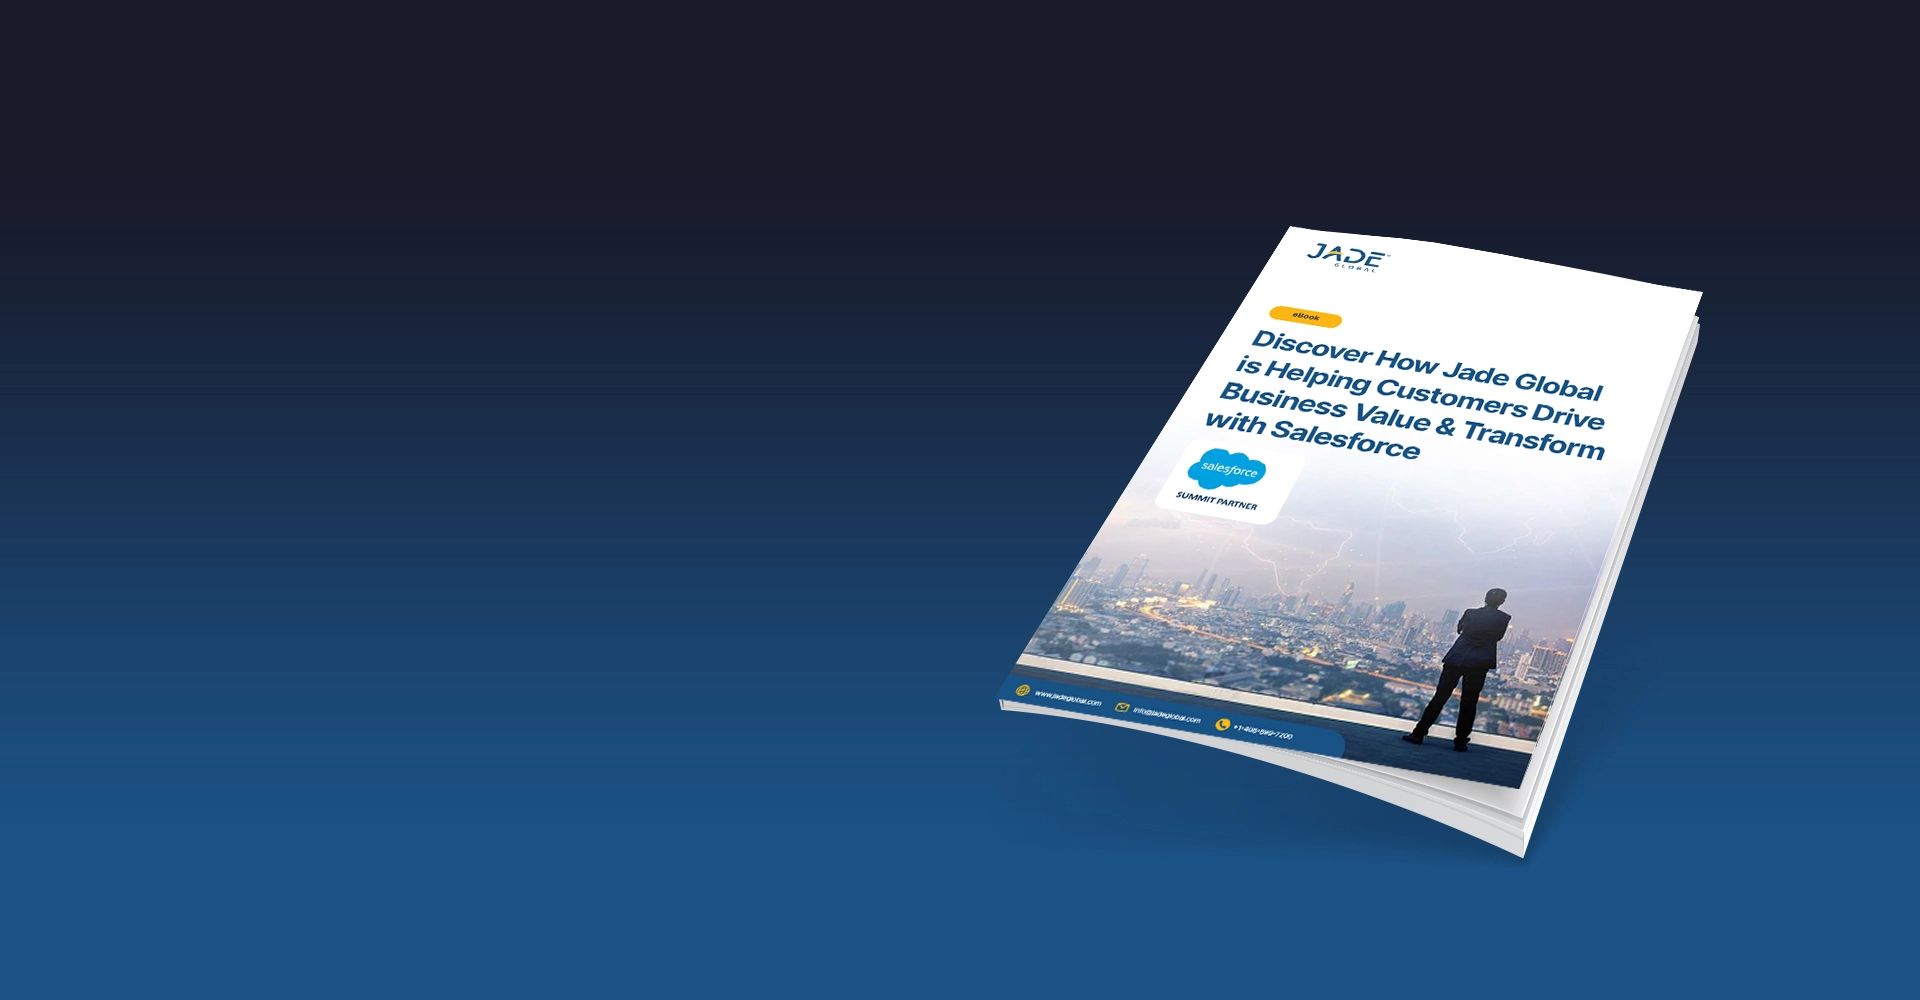 Discover How Jade Global is Helping Customers Drive Business Value & Transform with Salesforce